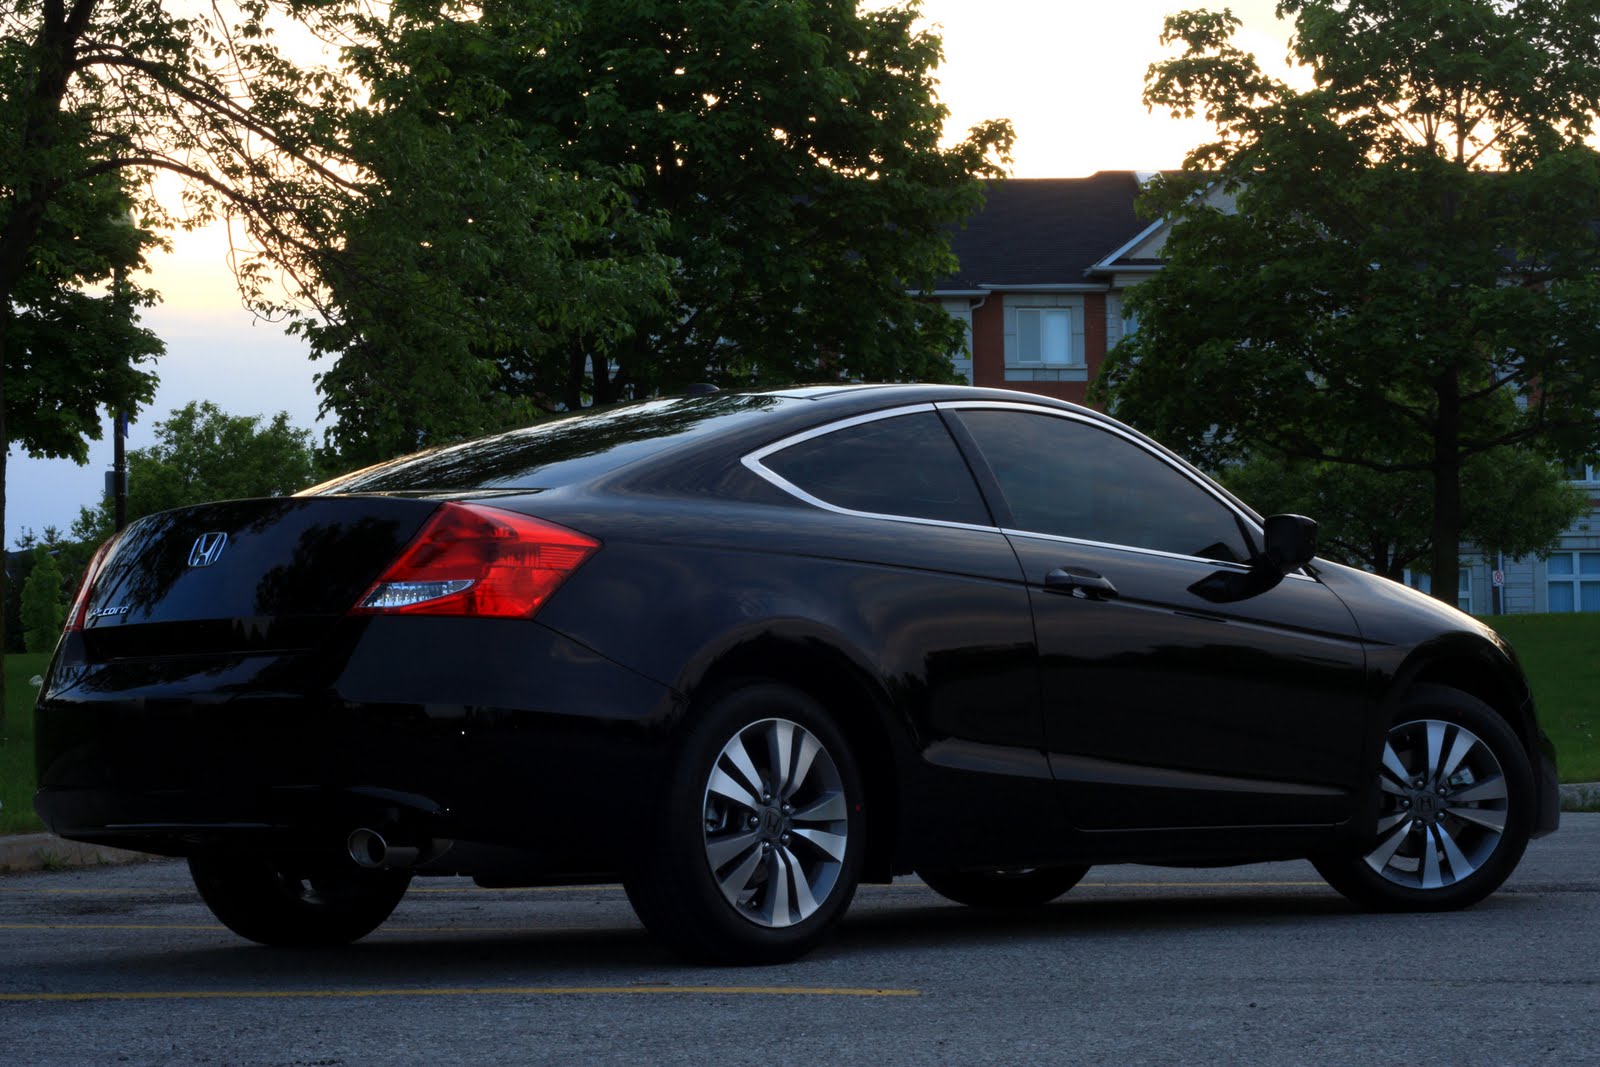 2011 Black Honda Accord Coupe High Resolution Pictures ~ DAVID